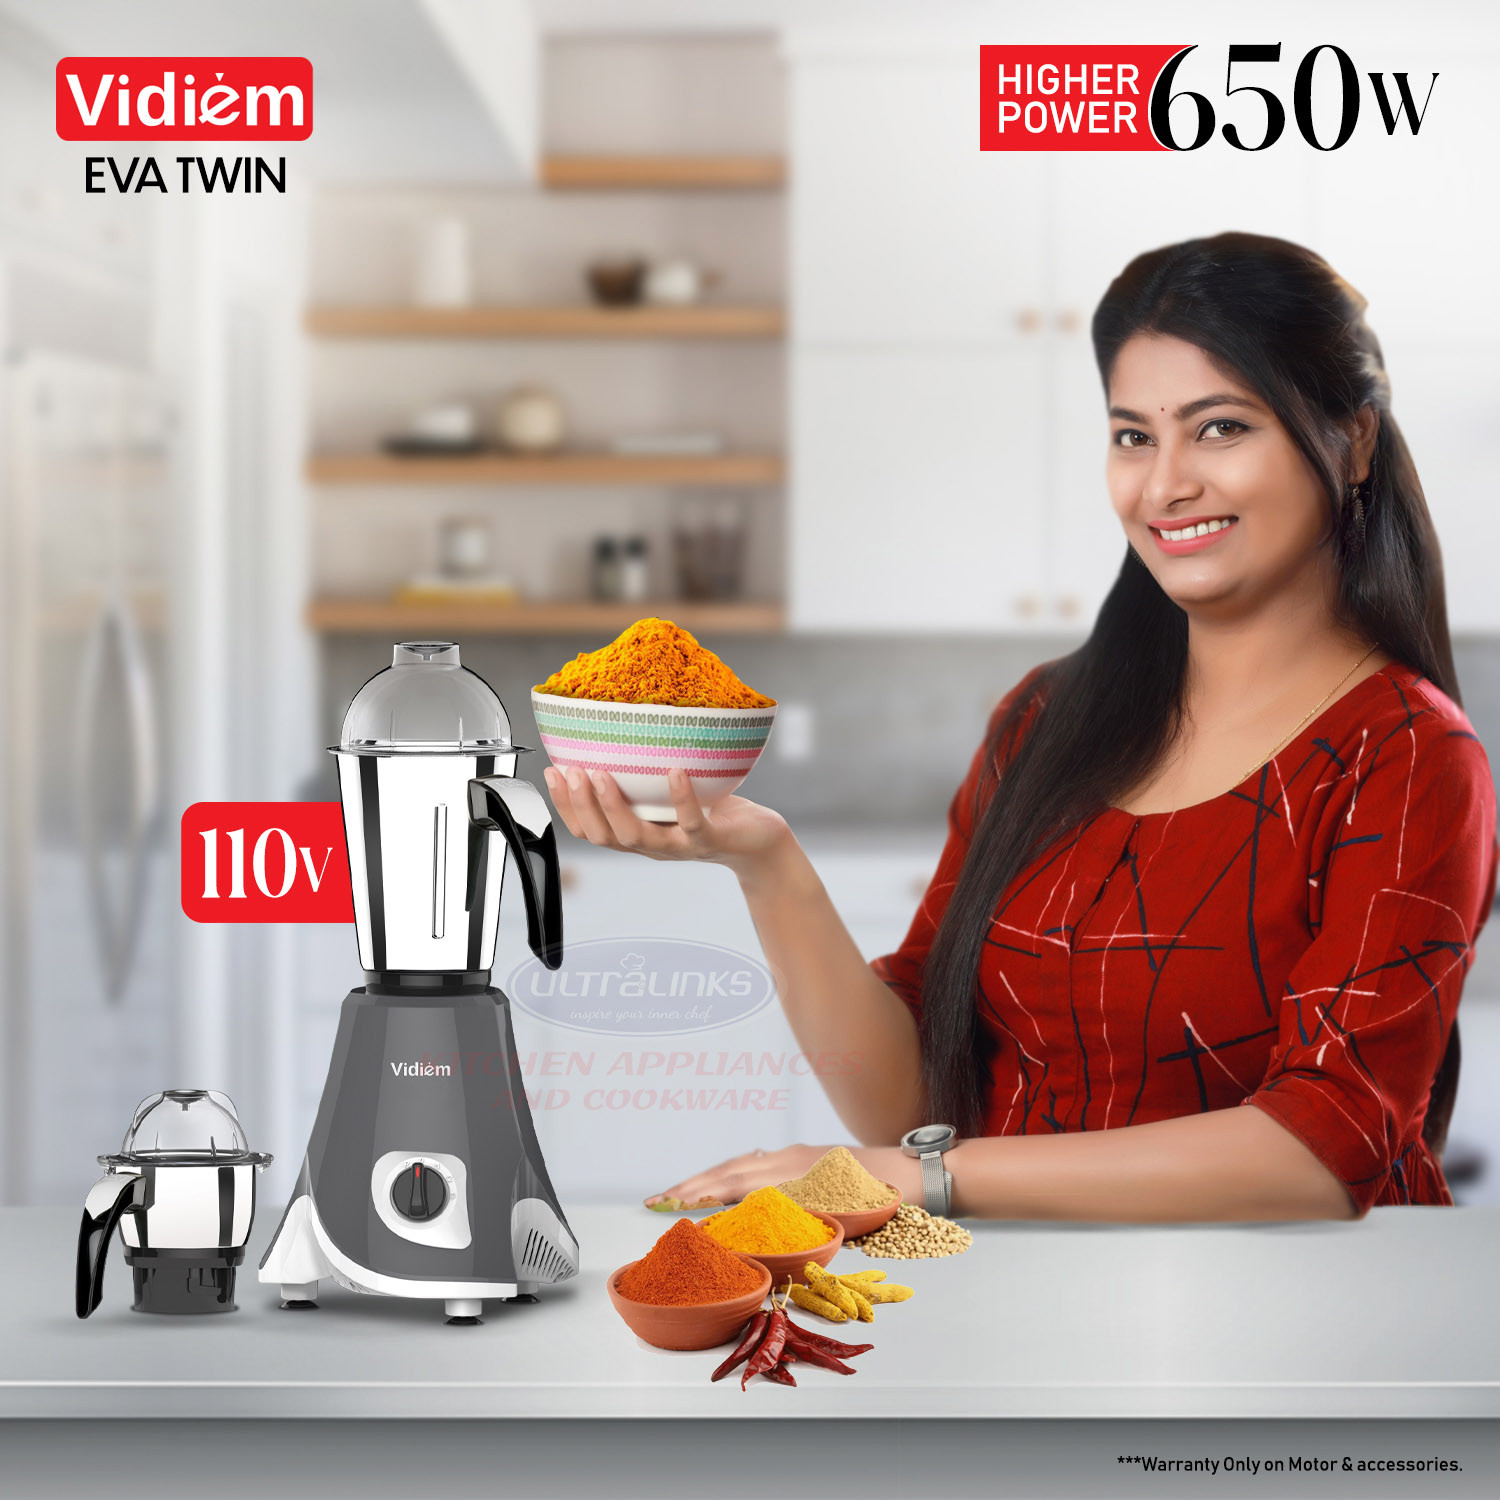 vidiem-eva-twin-650w-110v-stainless-steel-jars-indian-mixer-grinder-spice-coffee-grinder-for-use-in-canada-usa